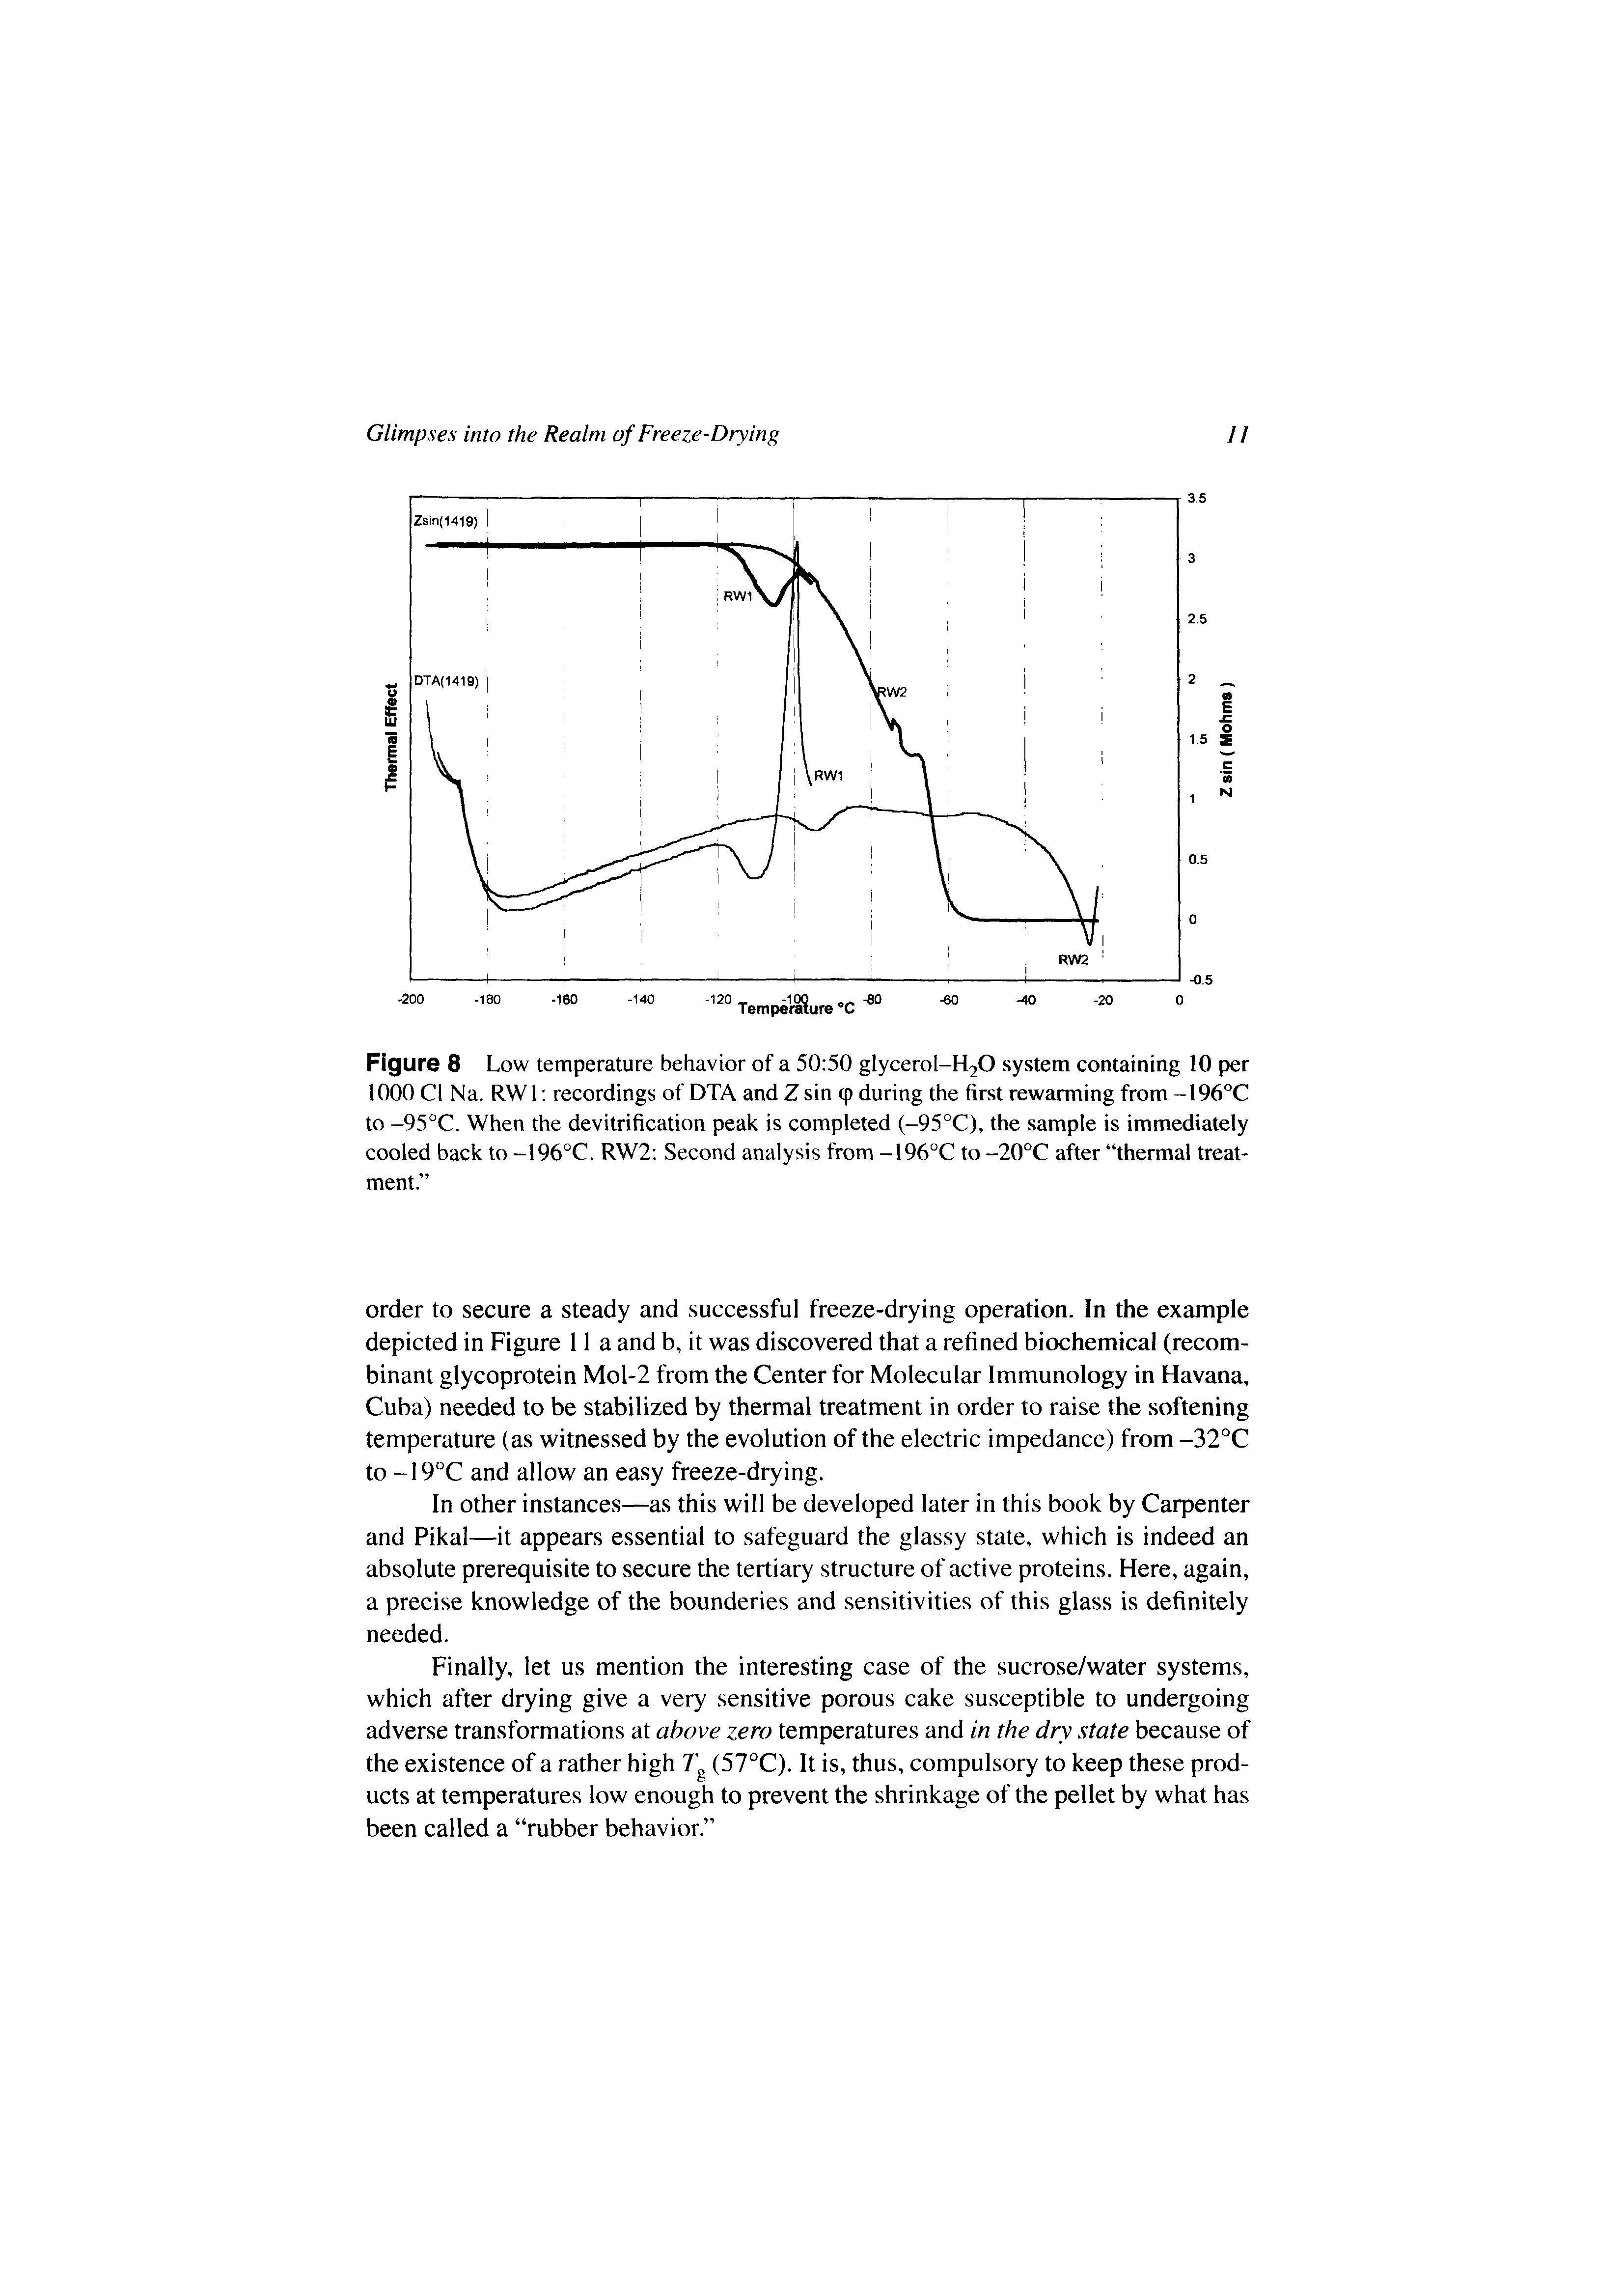 Figure 8 Low temperature behavior of a 50 50 glycerol-H20 system containing 10 per 1000 Cl Na. RW1 recordings of DTA and Z sin (p during the first rewarming from -196°C to -95"C. When the devitrification peak is completed (-95°C), the sample is immediately cooled back to -196°C. RW2 Second analysis from -196°C to -20°C after thermal treatment. ...